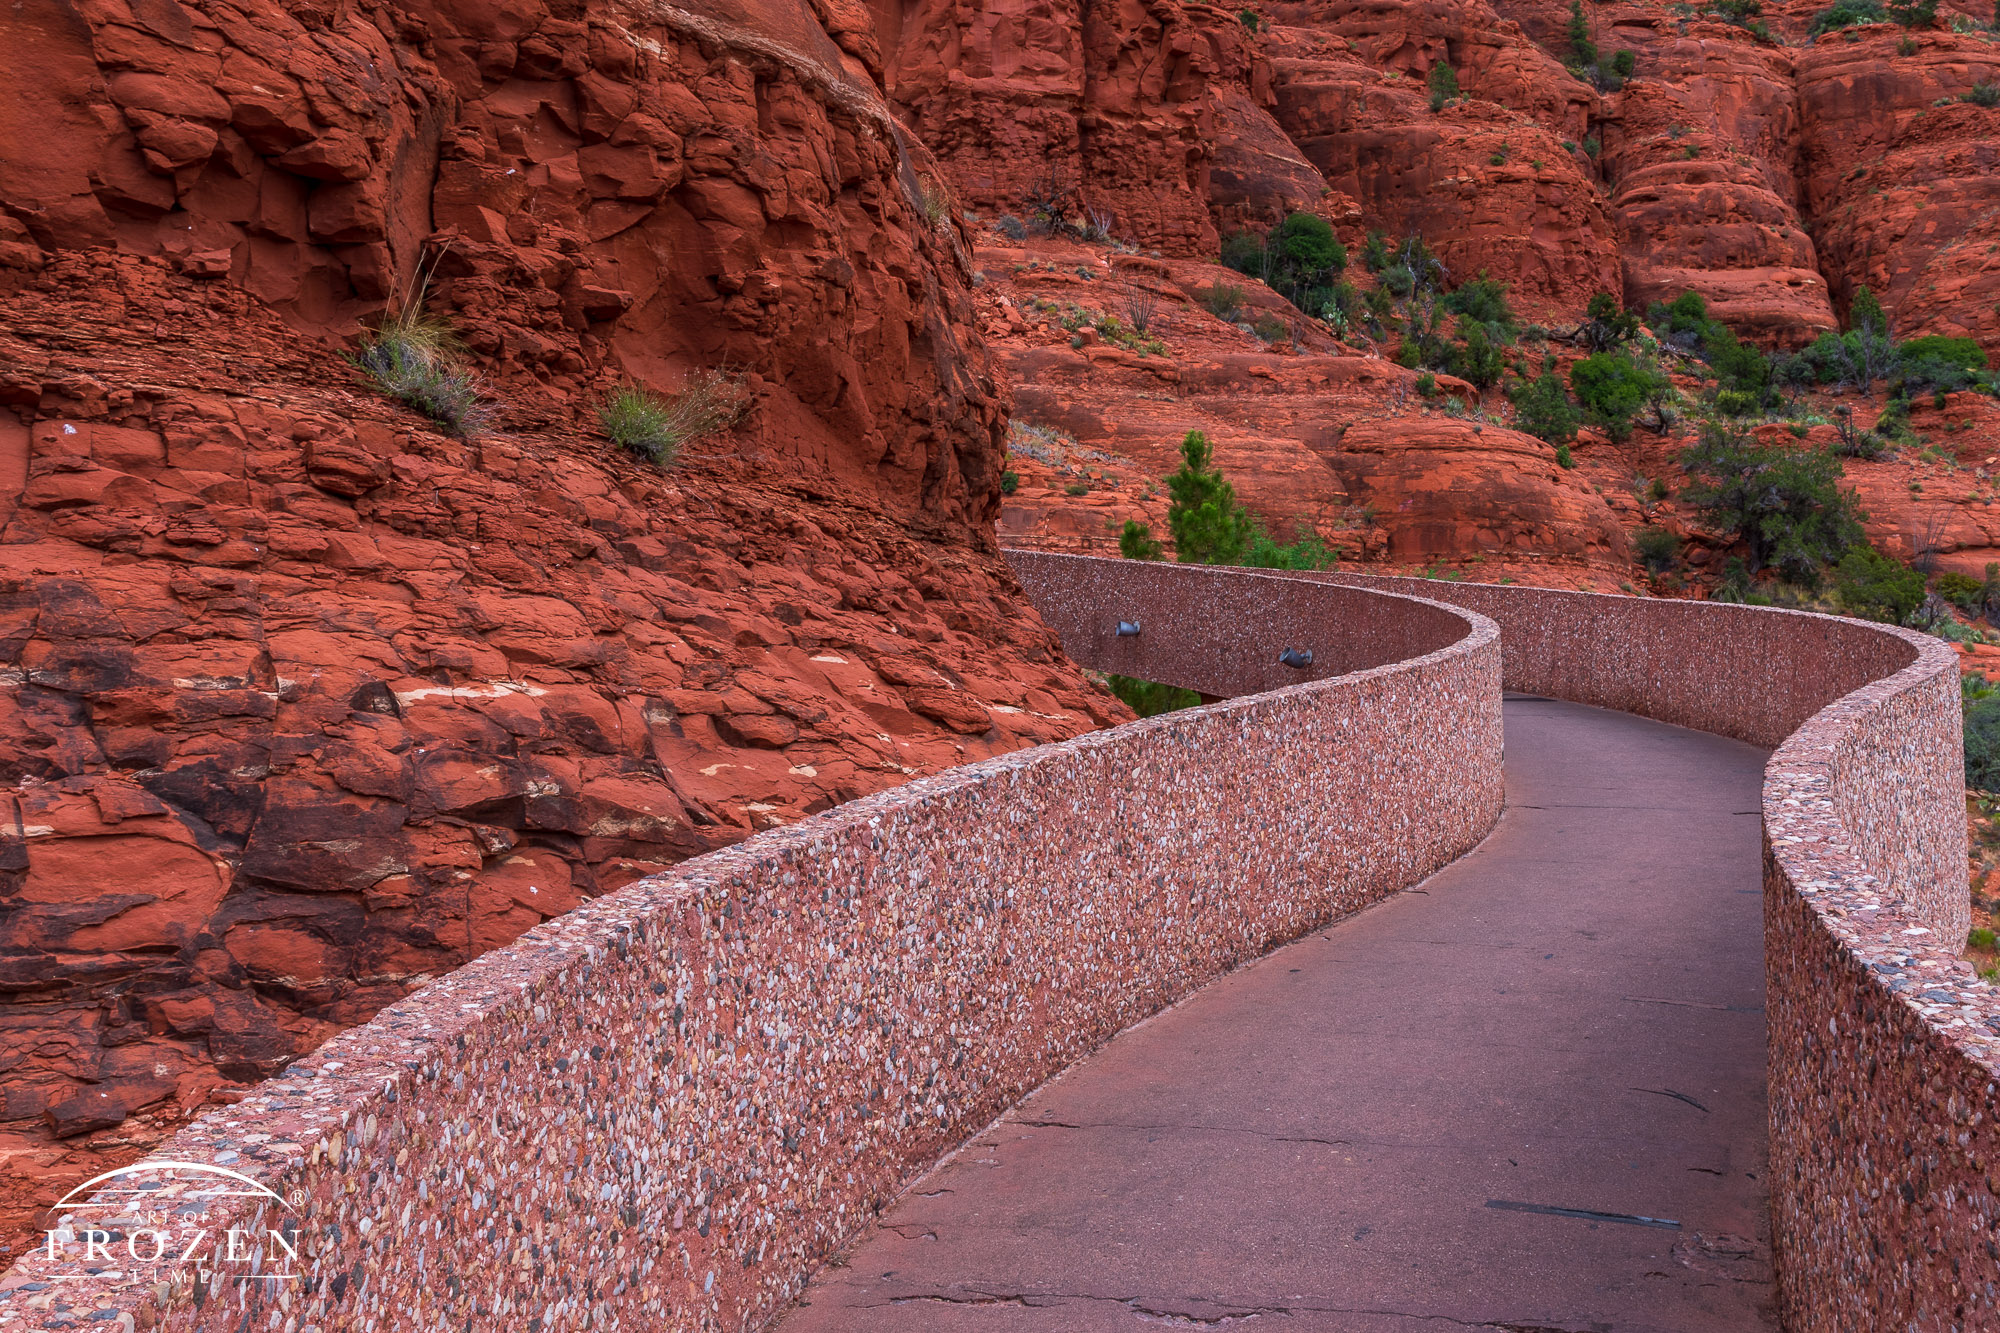 The smooth serpetine walls of a sidewalk leading visitors up to the Chaple of the Holy Cross in Sedona